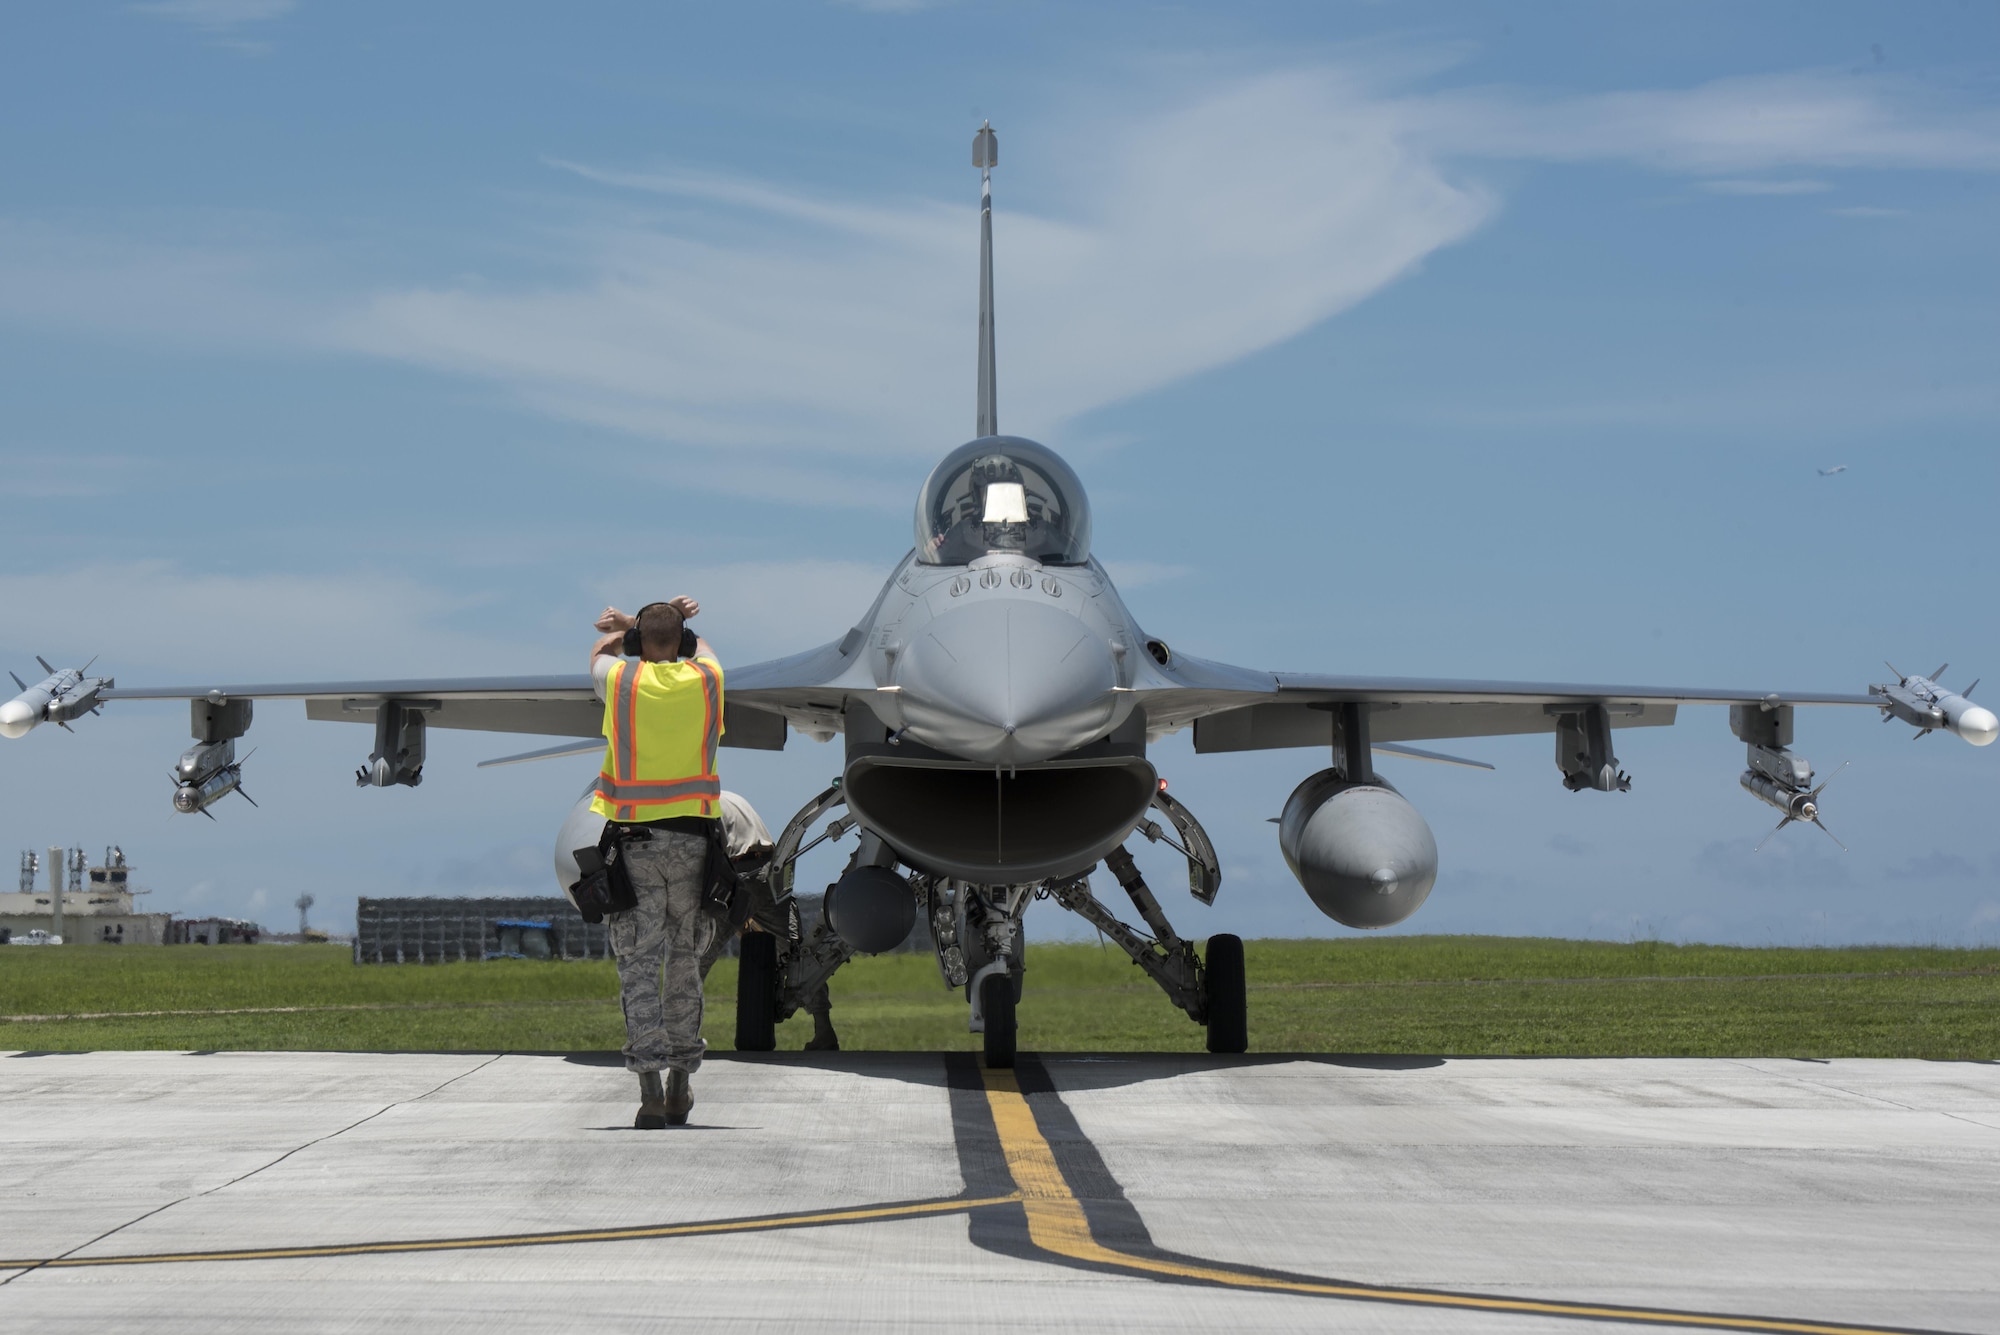 Airman on the flight line directing an F-16 aircraft